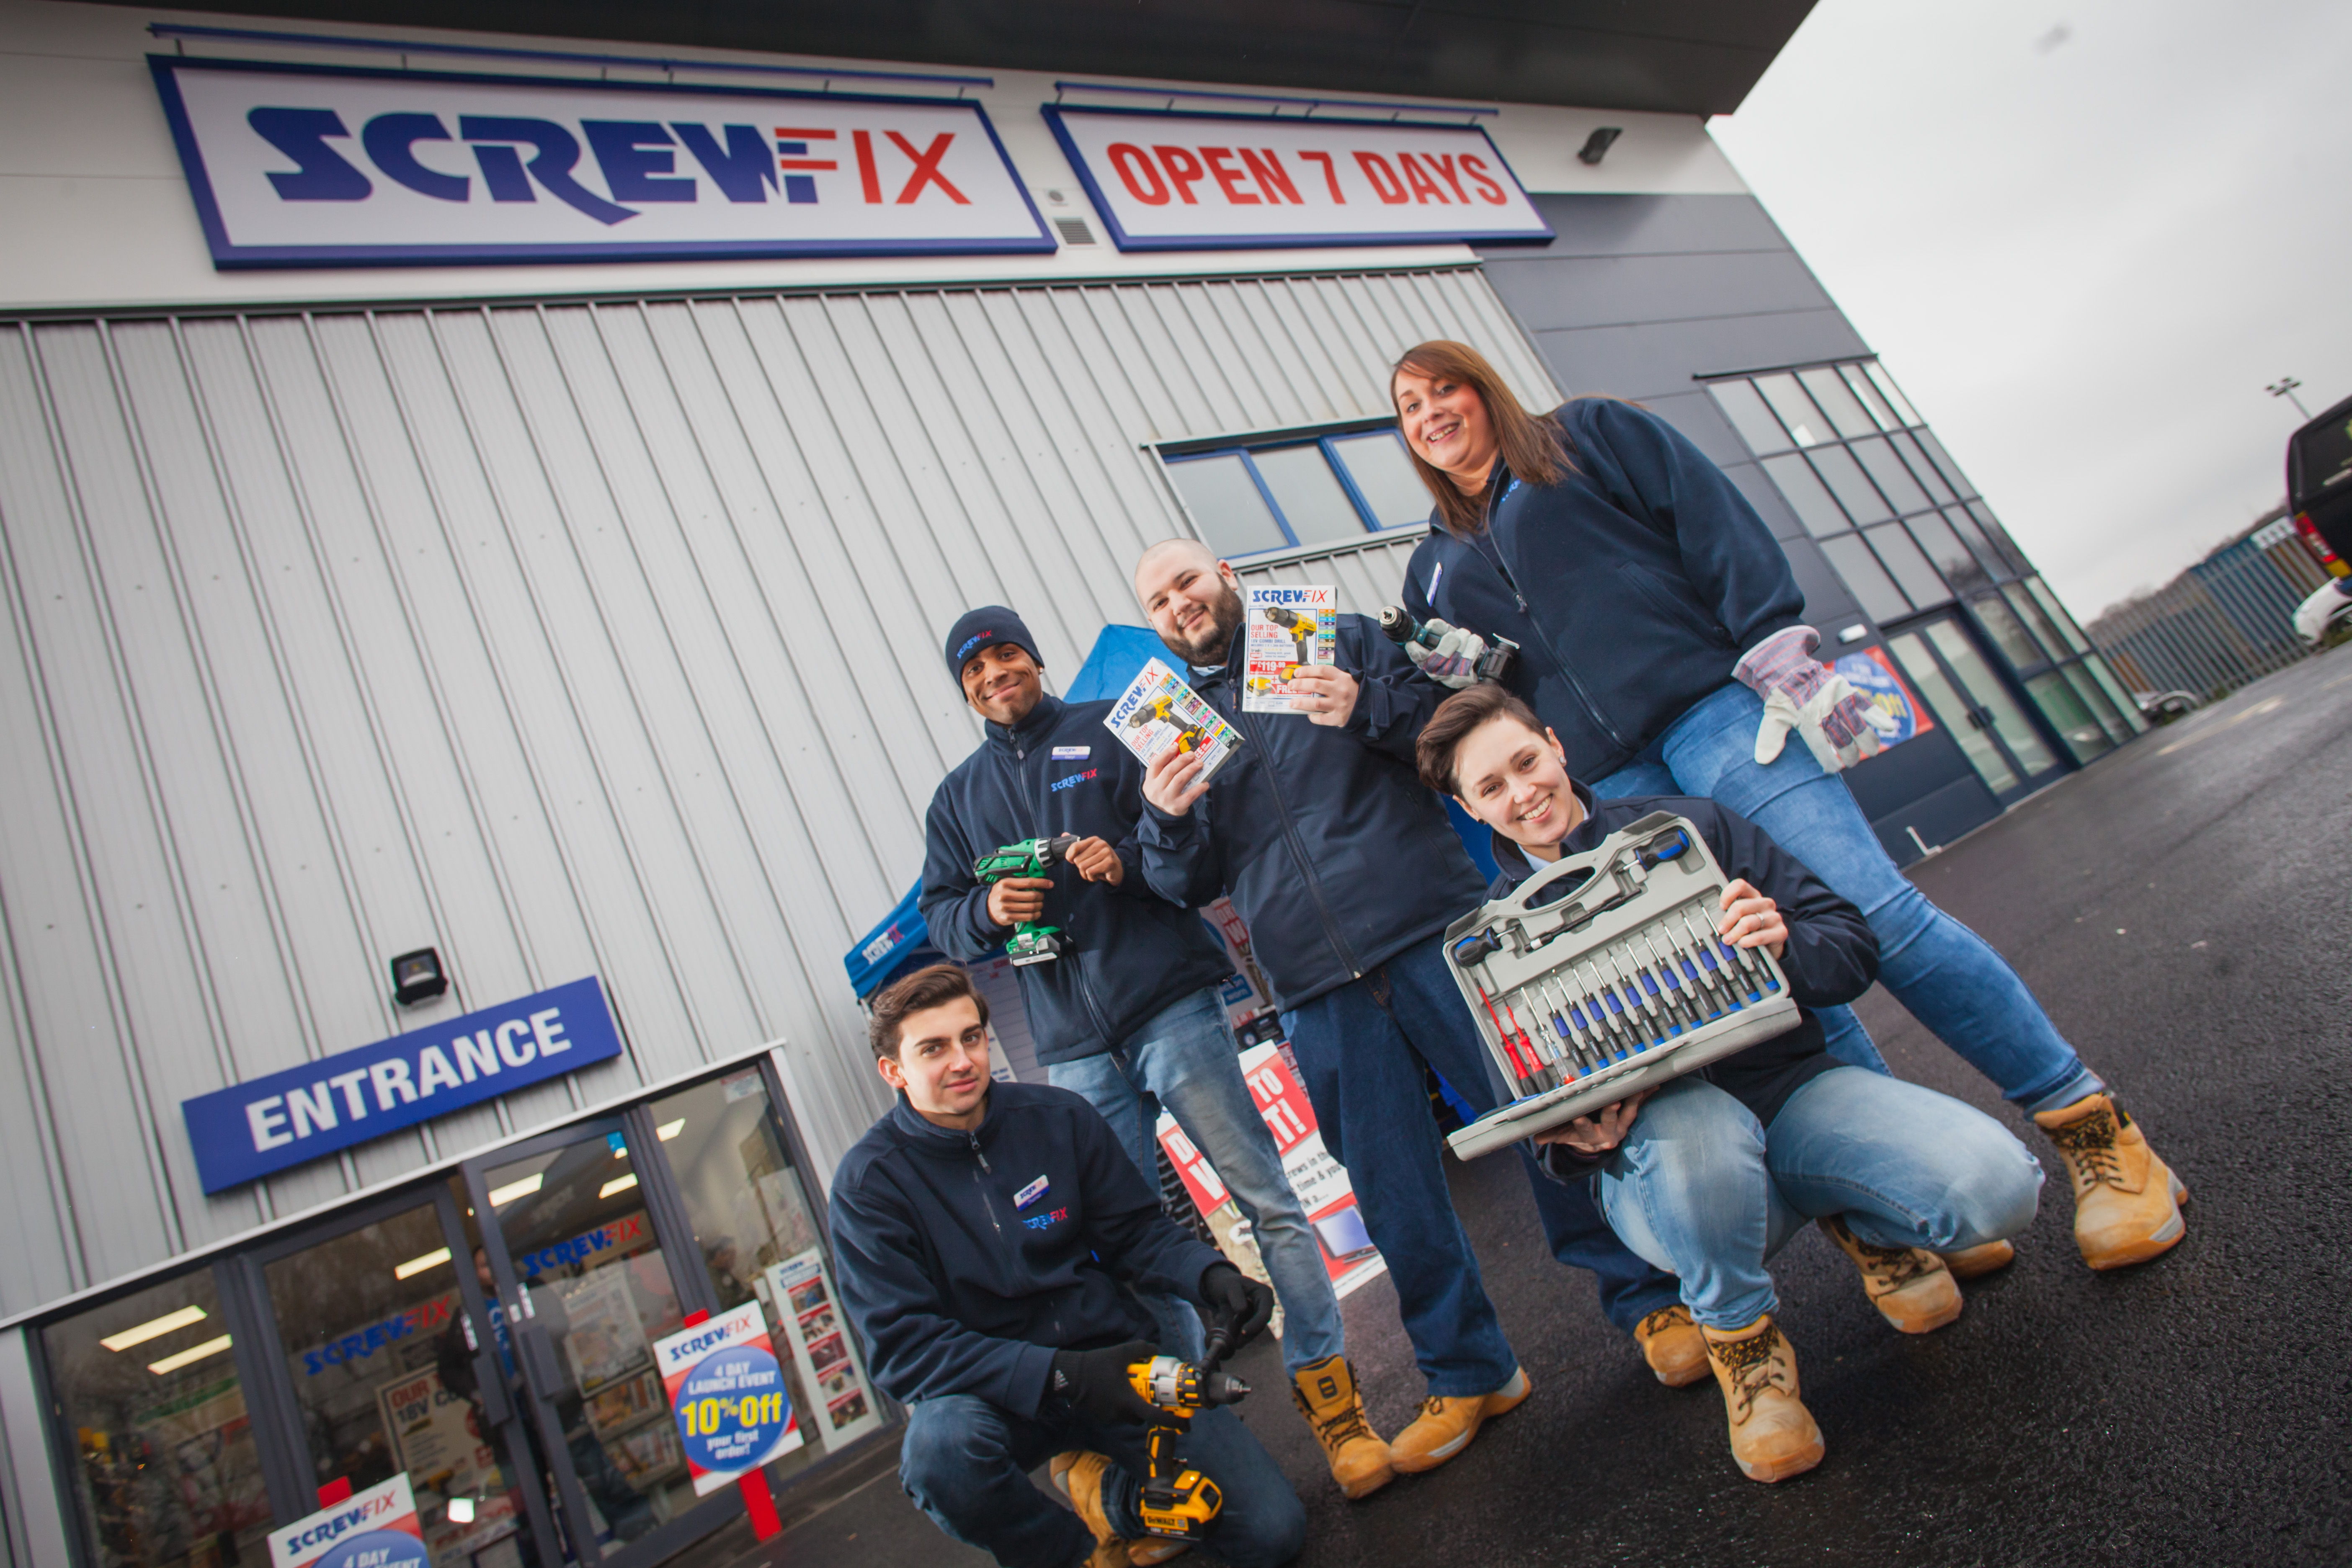 Highams Park’s first Screwfix store is declared a runaway success